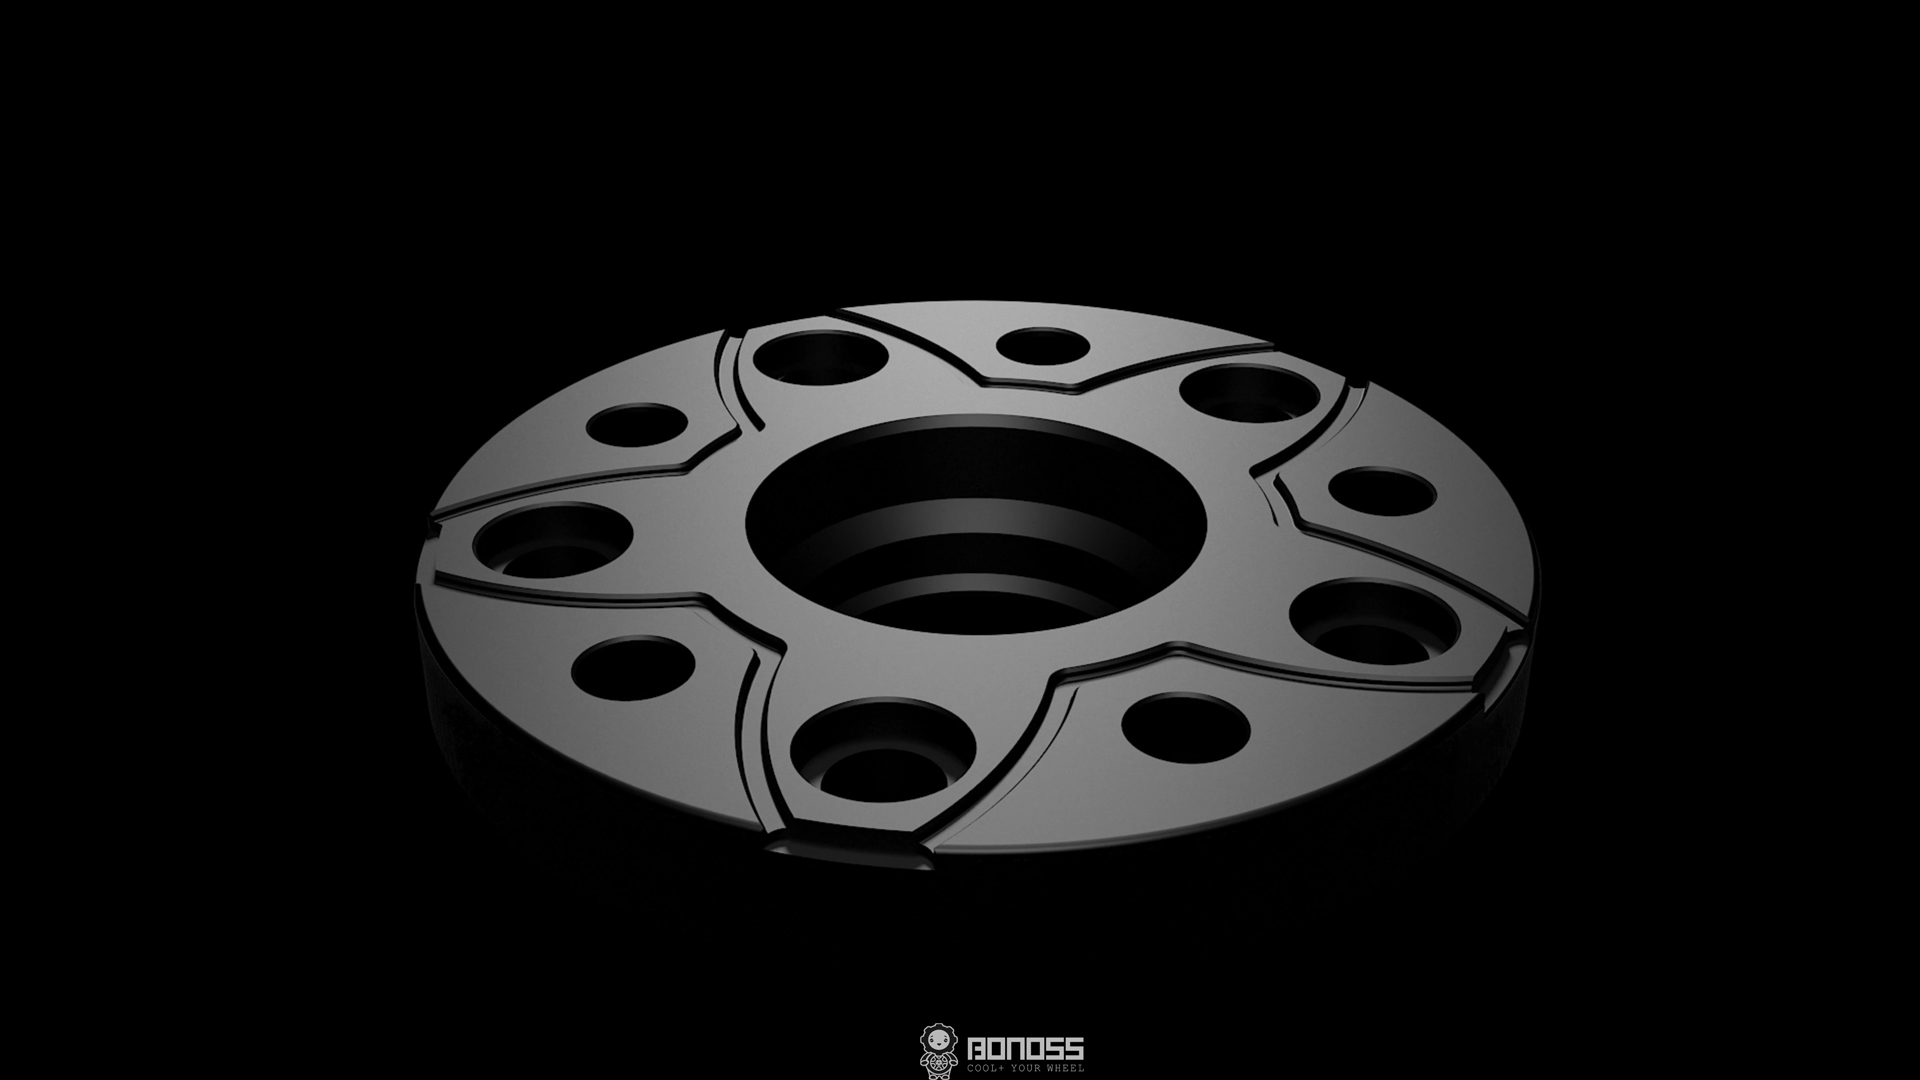 BONOSS Forged Active Cooling Wheel Spacers Hubcentric Wheel Spacers Safe for Rims